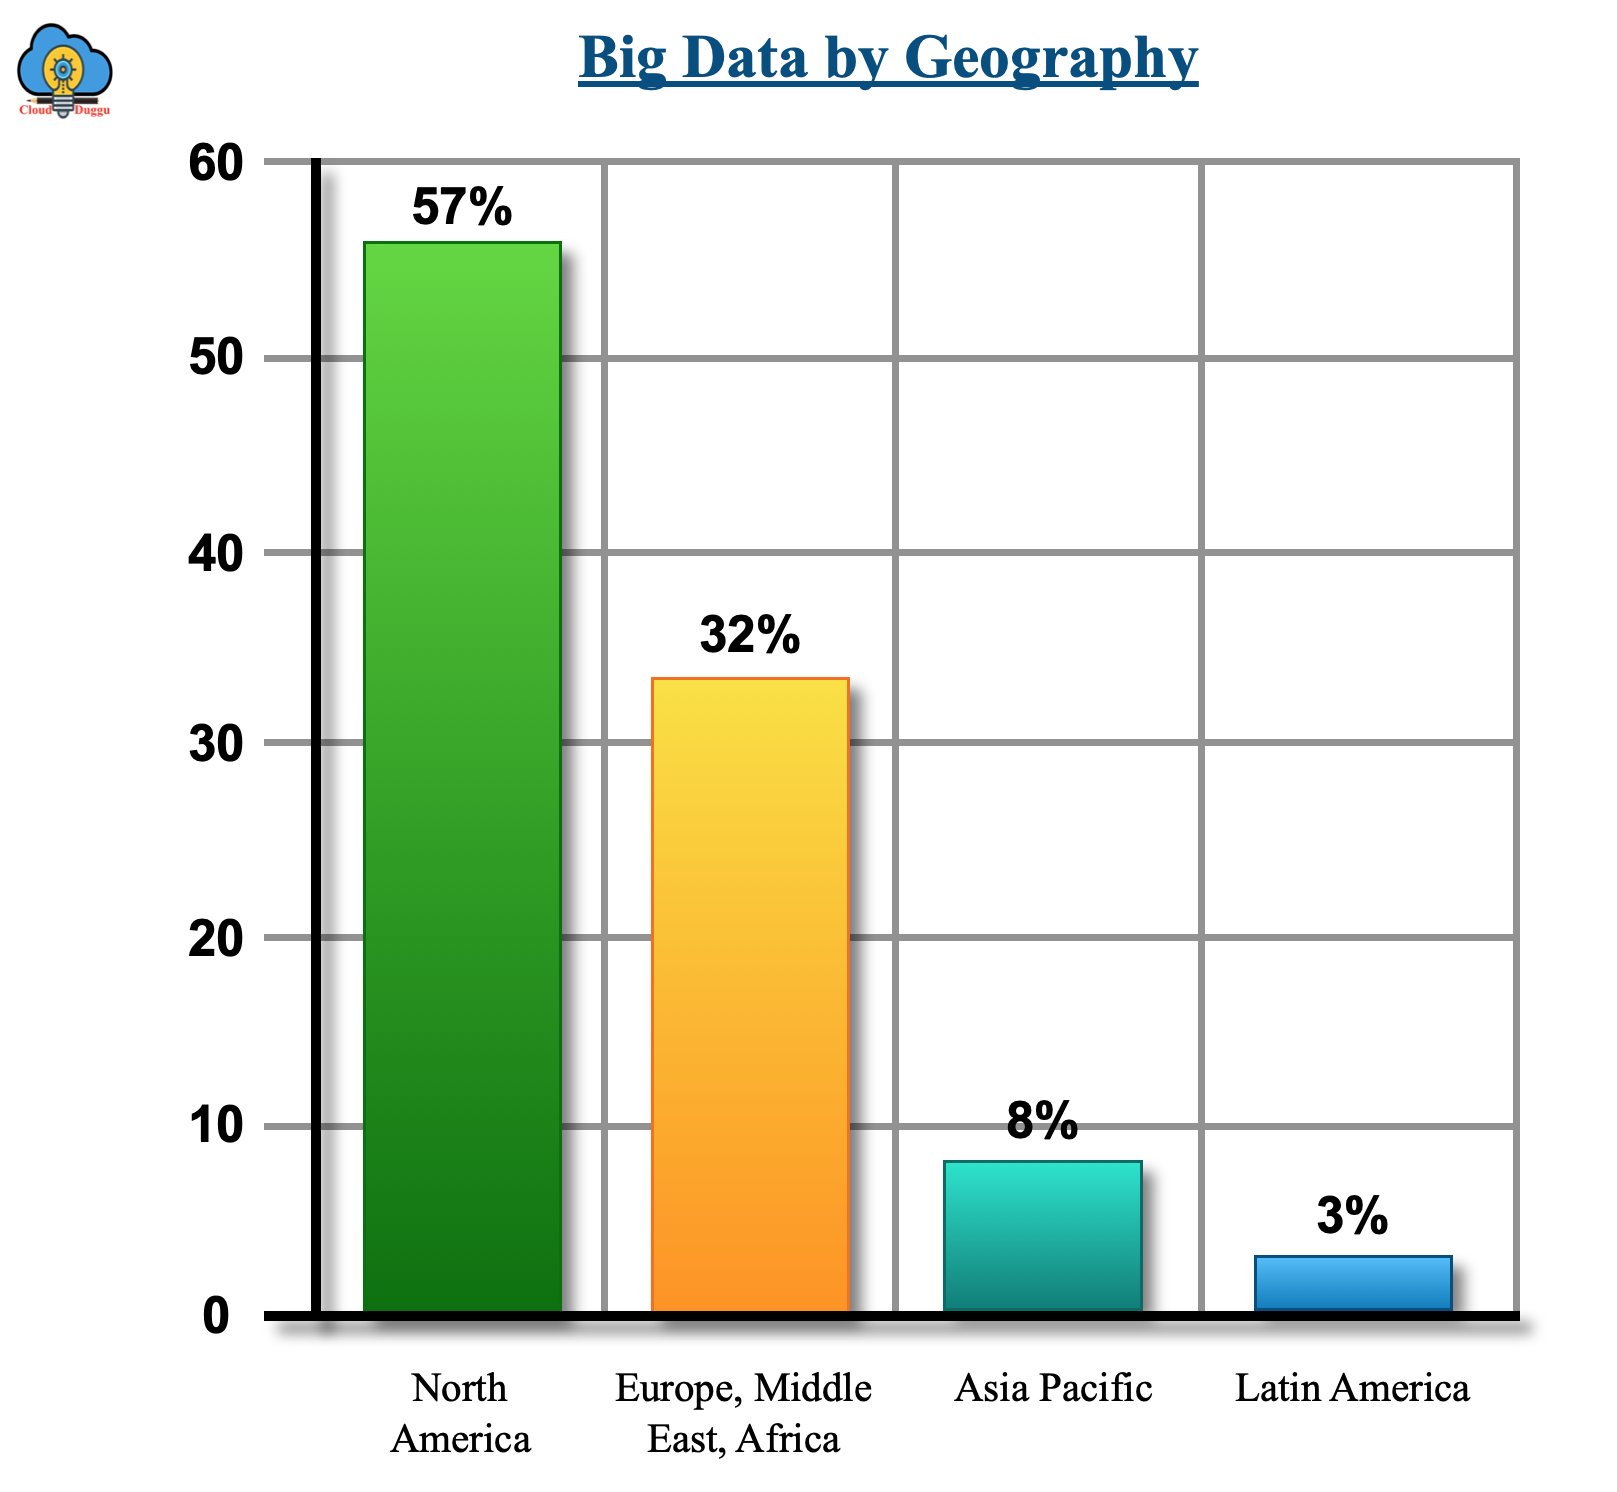 Big Data by Geography